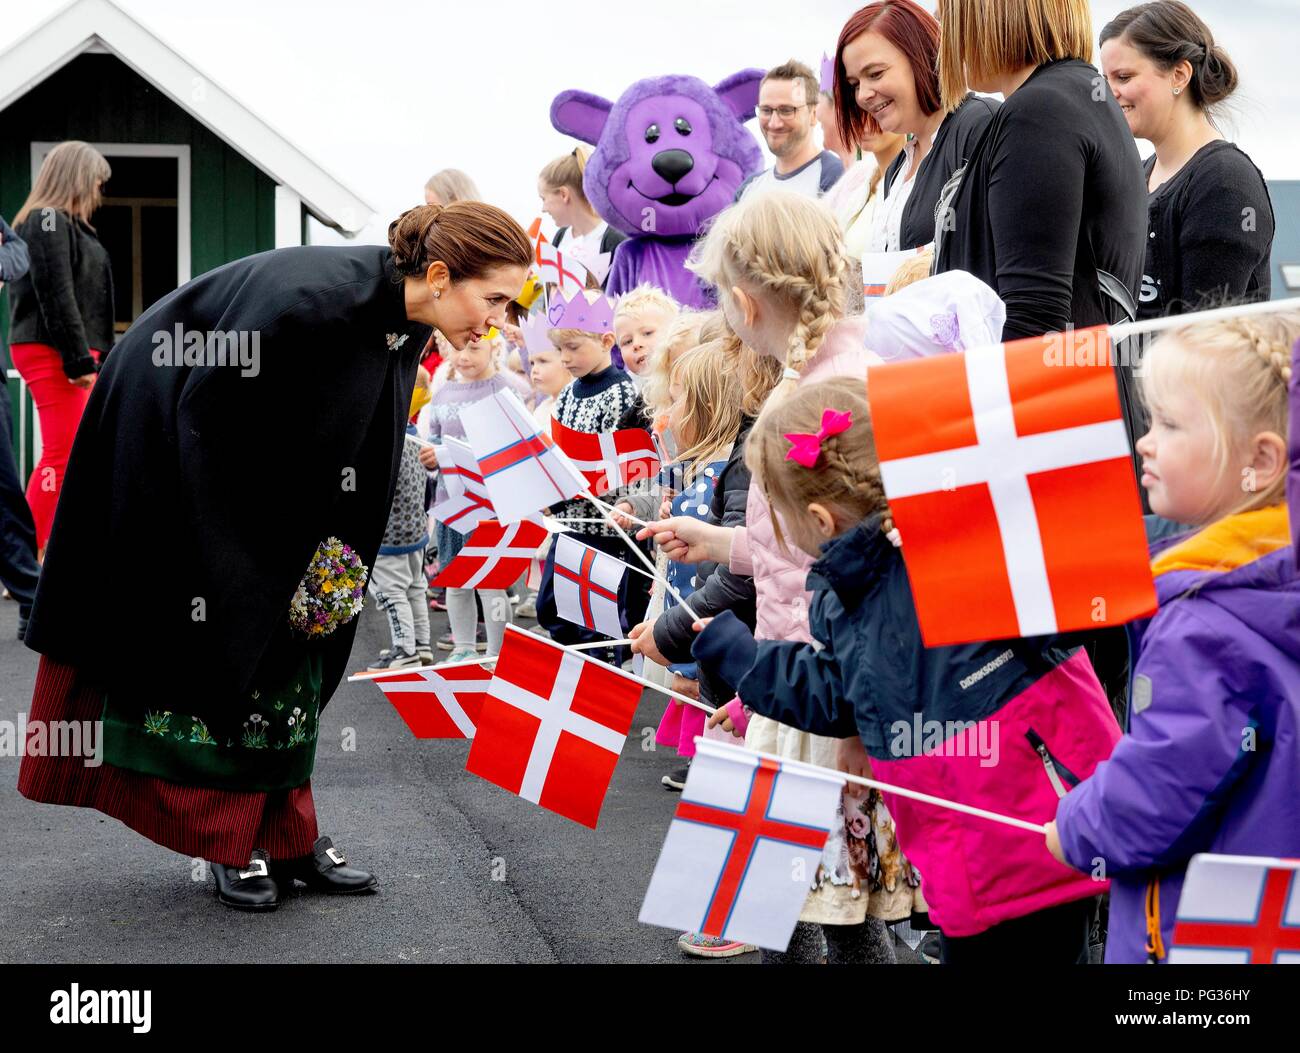 Torshavn, Faroe Islands, Denmark. 23rd Aug, 2018. Crown Princess Mary of Denmark at Torshavn, on August 23, 2018, to visit the school ? Argjahamri, on the 1st of the 4 days visit to the Faroe Islands Photo : Albert Nieboer/ Netherlands OUT/Point de Vue OUT | Credit: dpa/Alamy Live News Stock Photo